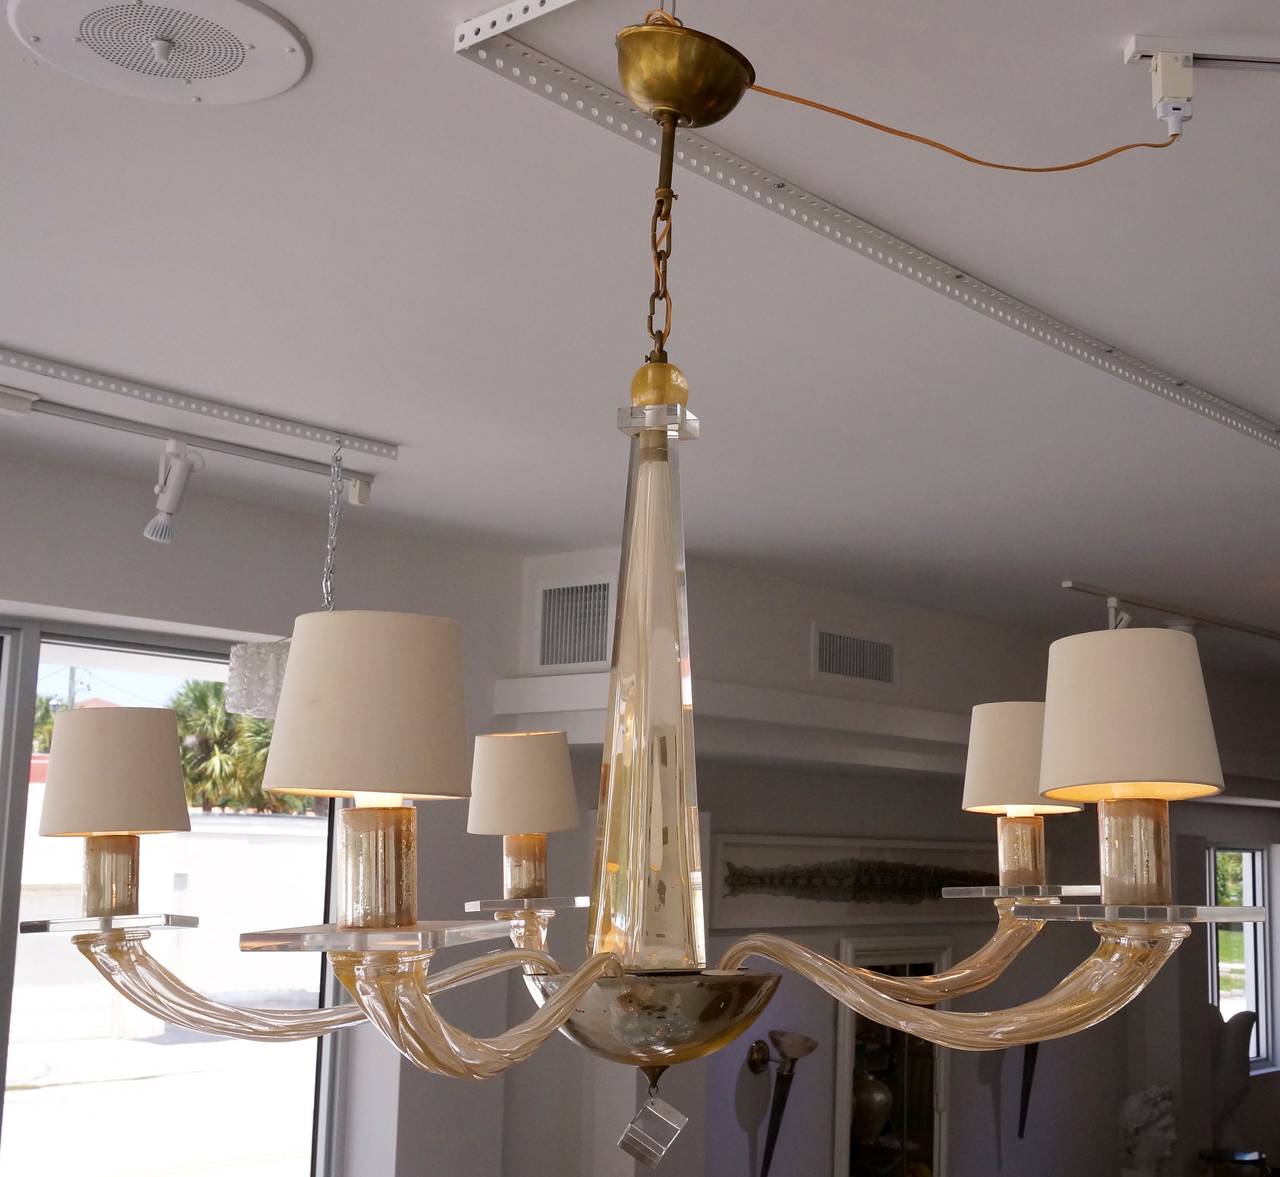 This Murano glass chandelier was created in the 1980s by Seguso for the Angelo Donghia showrooms.  The piece was acquired from the Miami, Florida  estate of the Seguso family.

This piece is done in a clear, champagne and gold coloration.

The